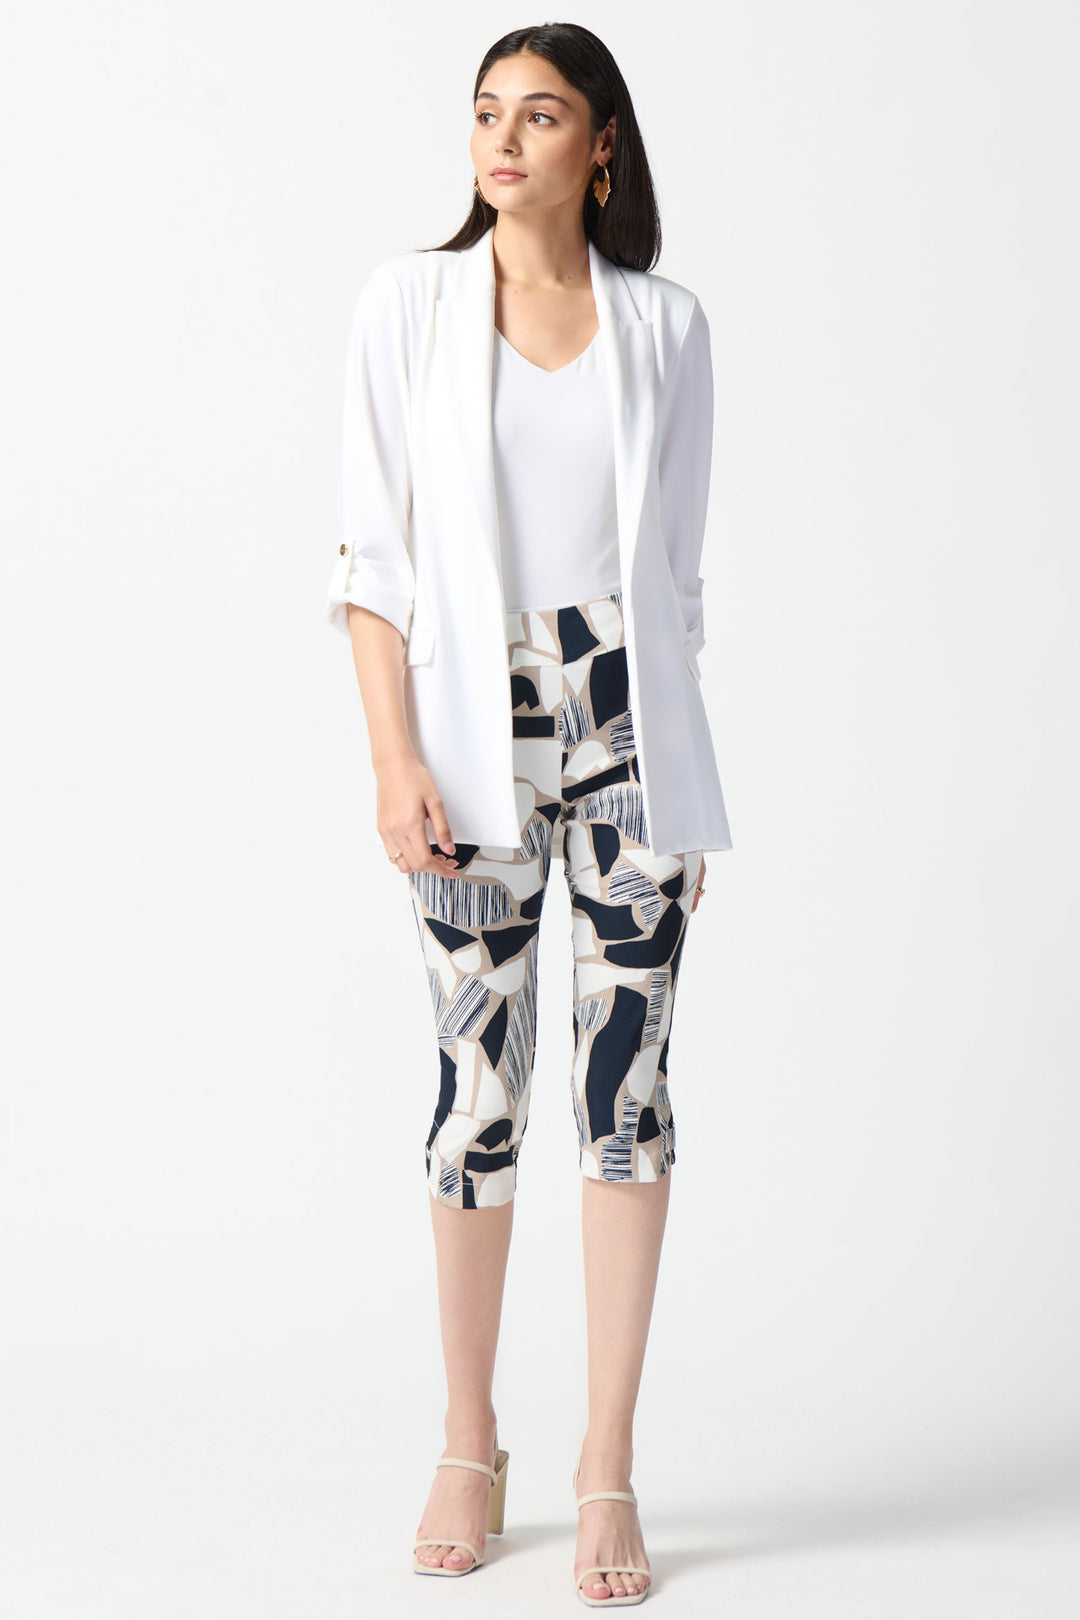 JOSEPH RIBKOFF Spring 2024 The sleek capris are crafted from a stretchy fabric for maximum comfort, while the waistband ensures a polished fit.